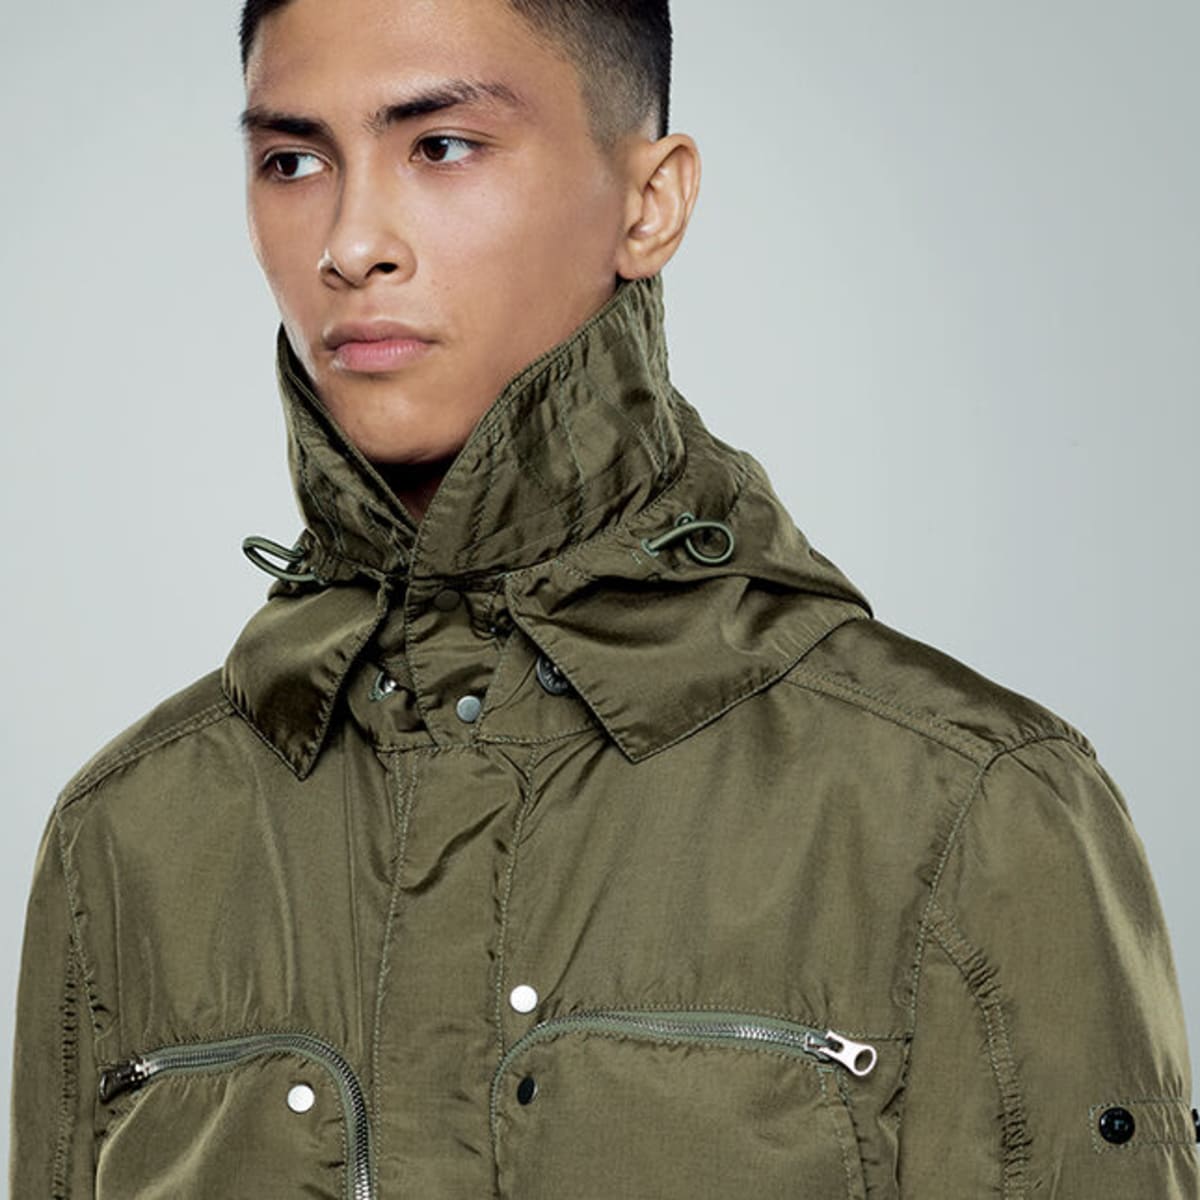 Stone Island releases its SS21 Shadow Project collection - Acquire